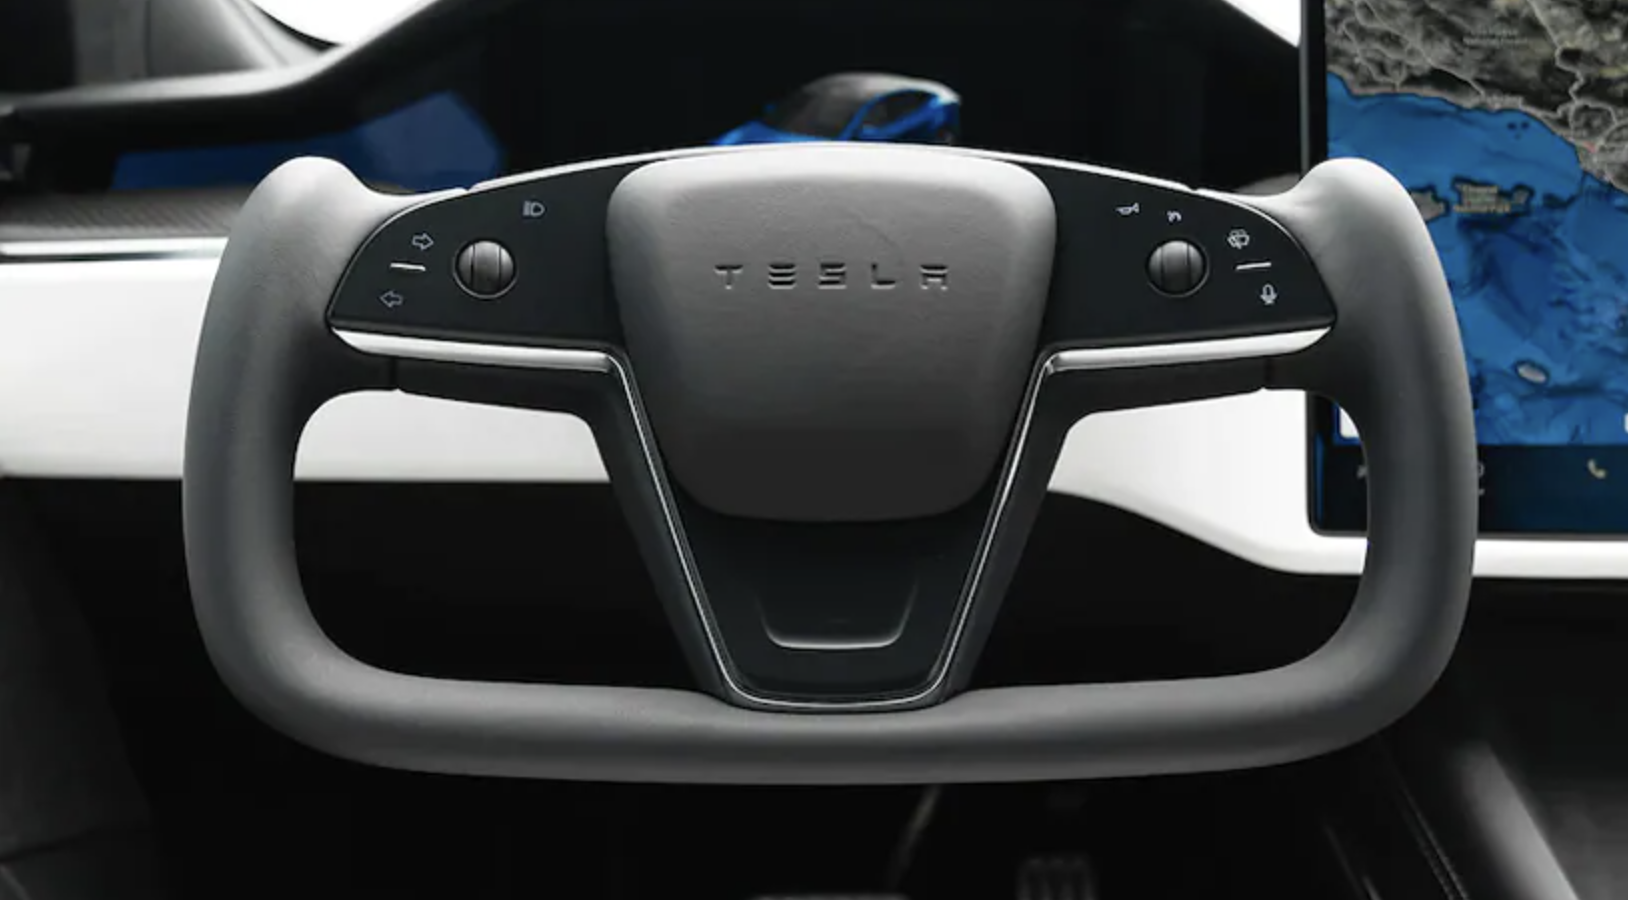 What are the odd lines on the Tesla steering wheel